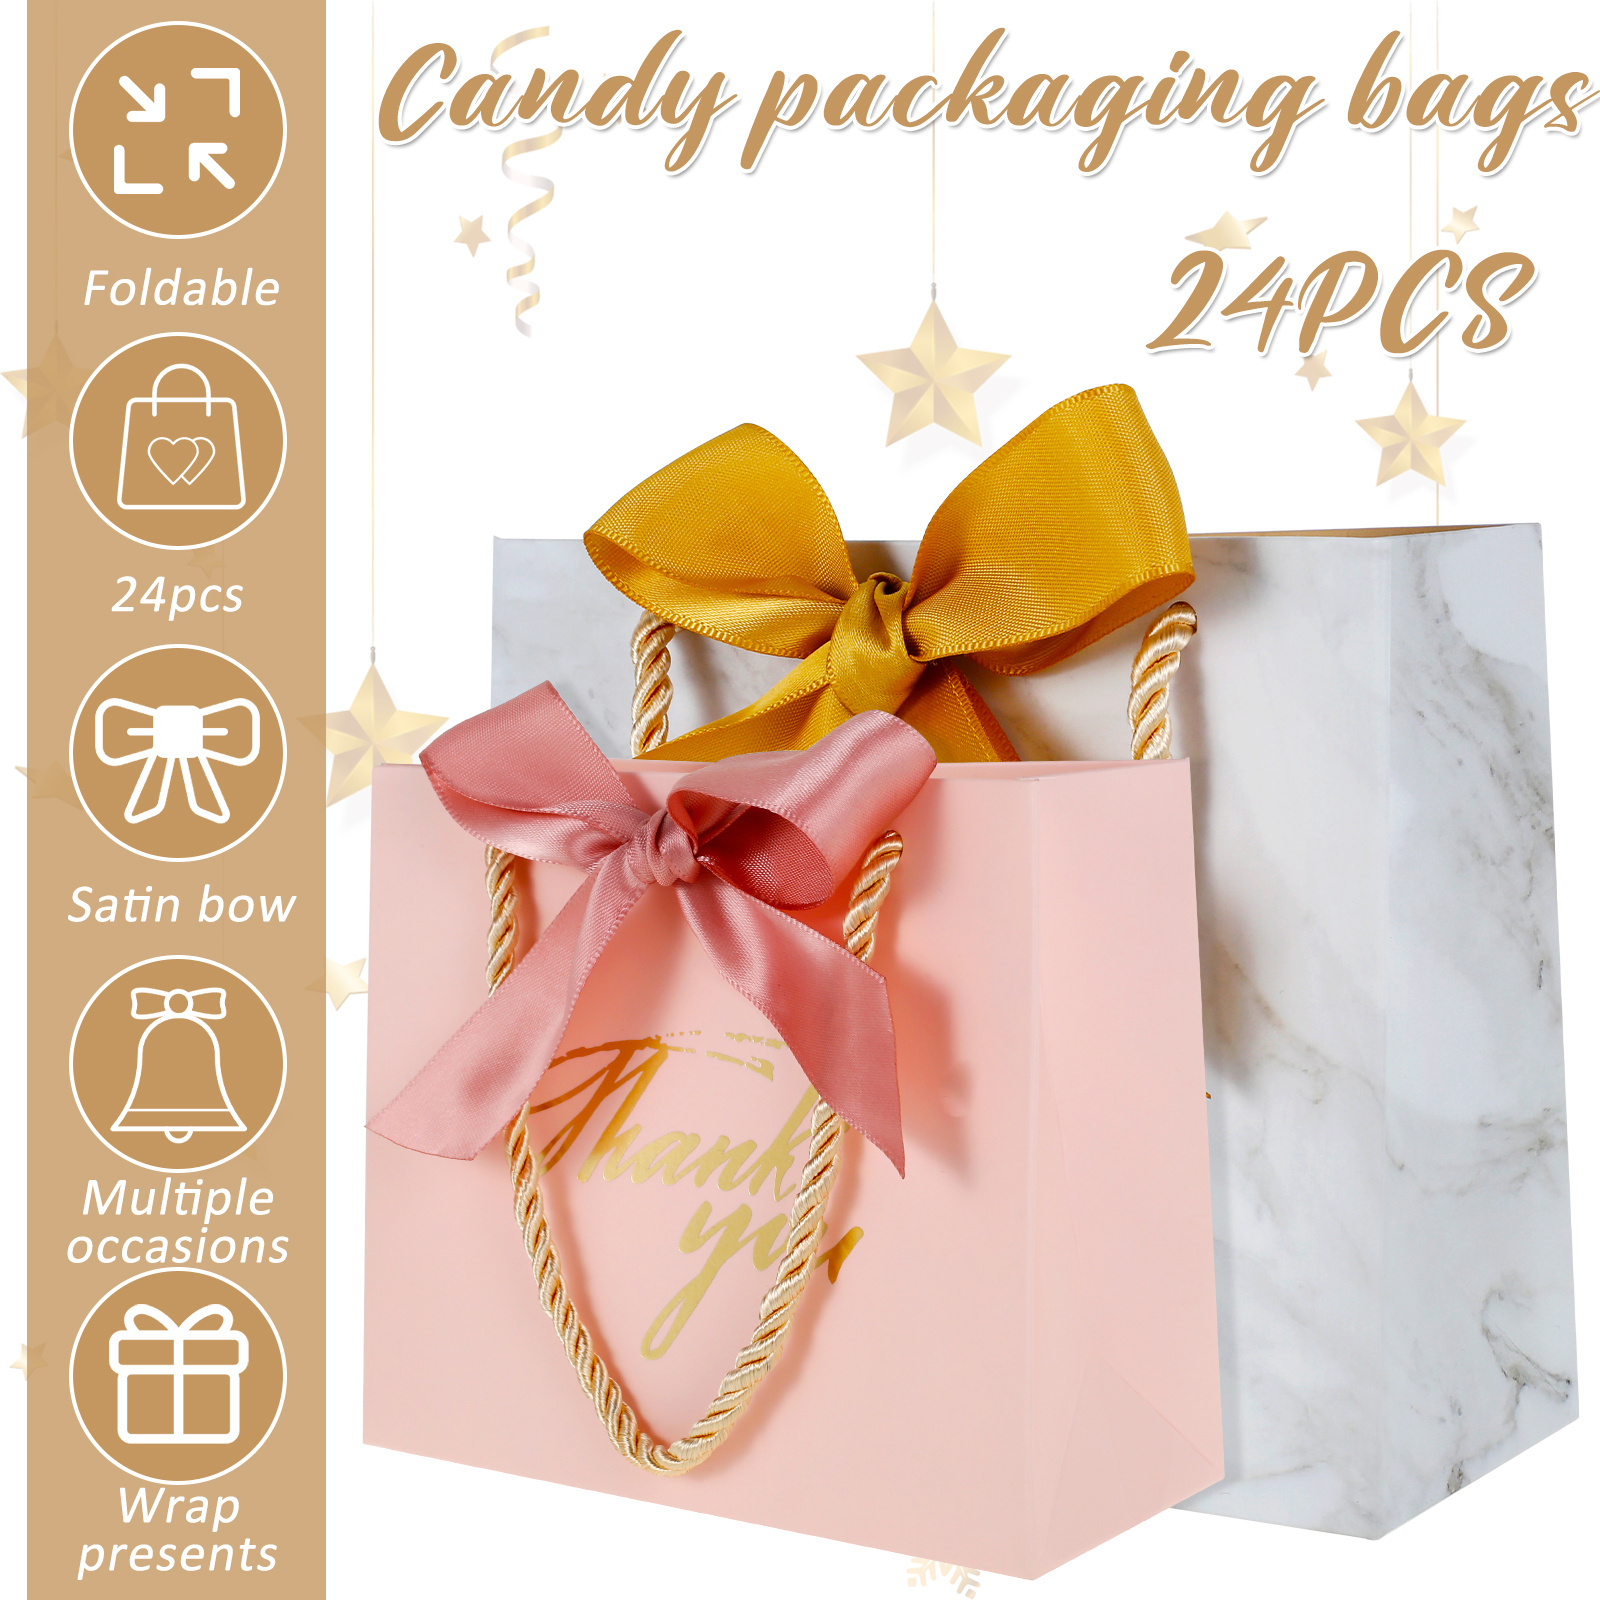 8x 11 - 50PCS Flat Bottom Clear Cellophane Treat Bags with Golden Satin  Ribbon | Goodie Bags for Gift Wrapping, Desserts, Candies, Cookies, Party